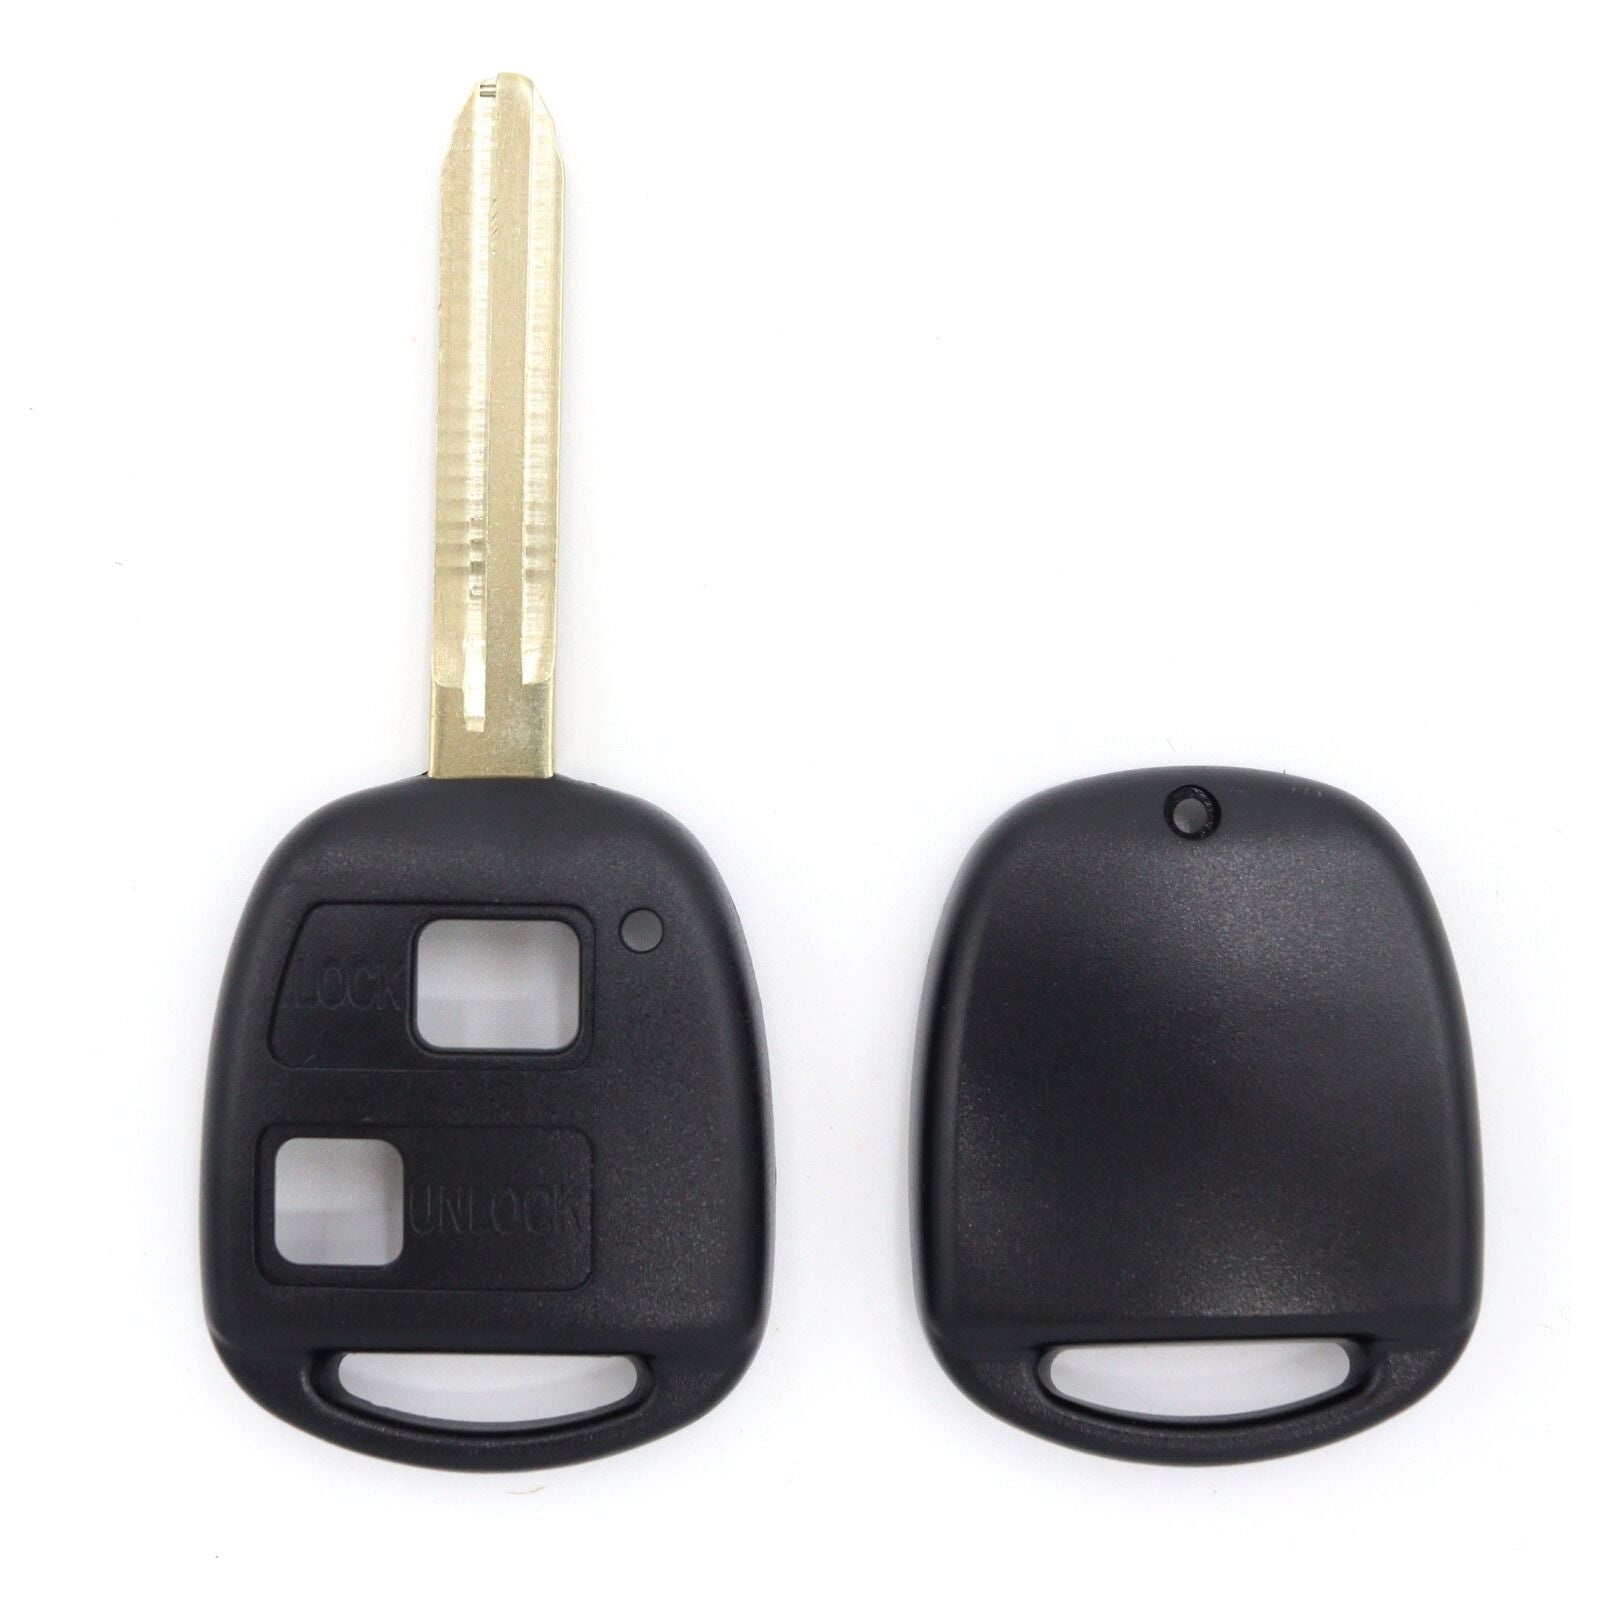 Compatible With Toyota Prado RAV4 Corolla Remote Car Key Blank Shell/Case Pack of 2 - Office Catch